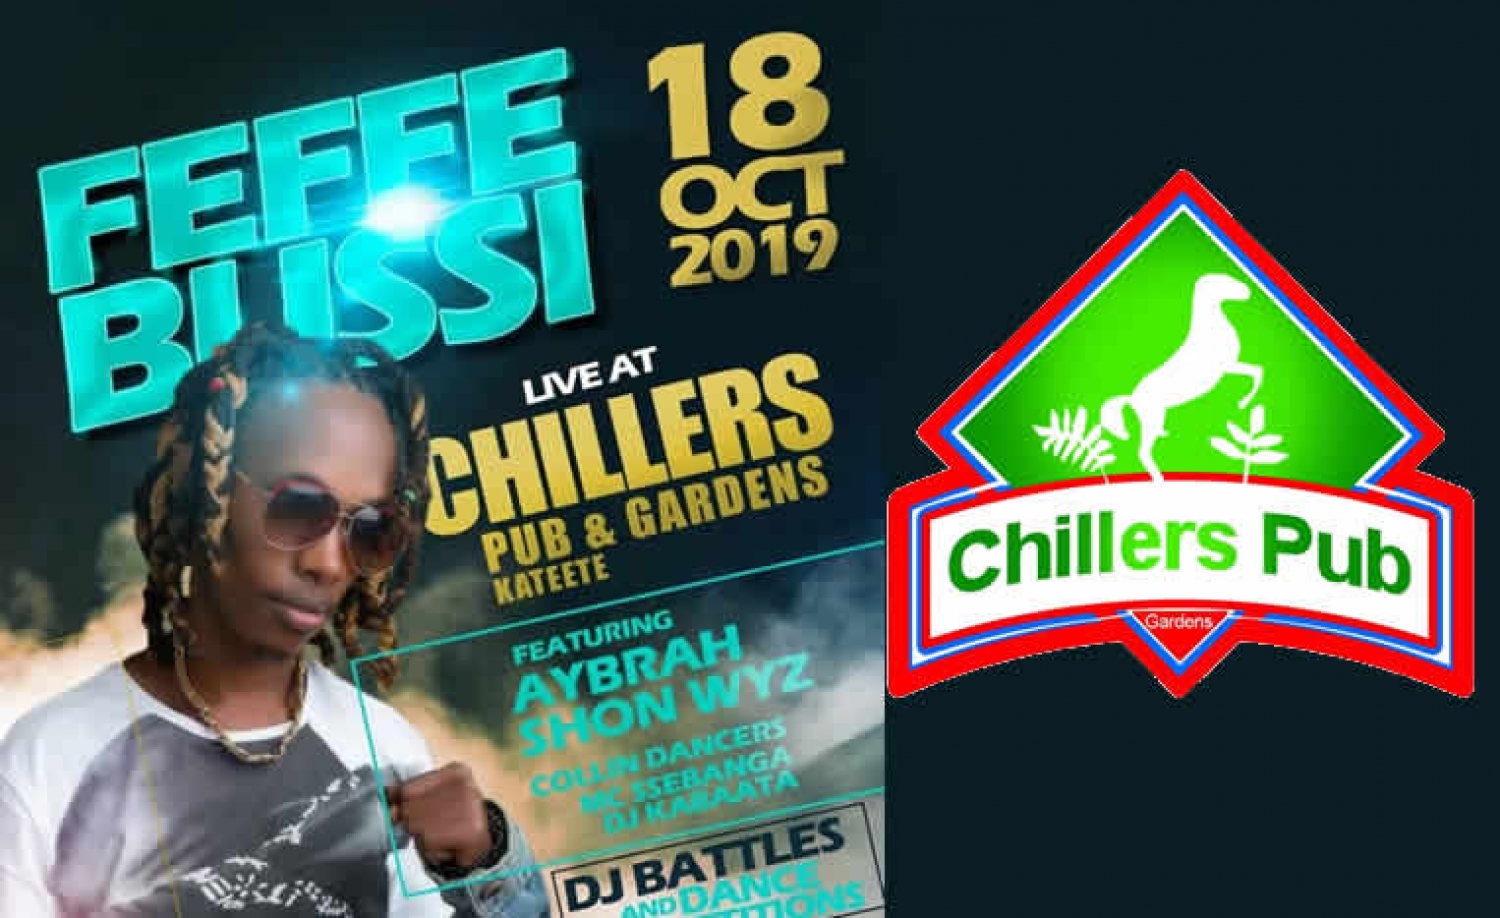 FEFFE BUSI live at Chillers on 18 October 2019